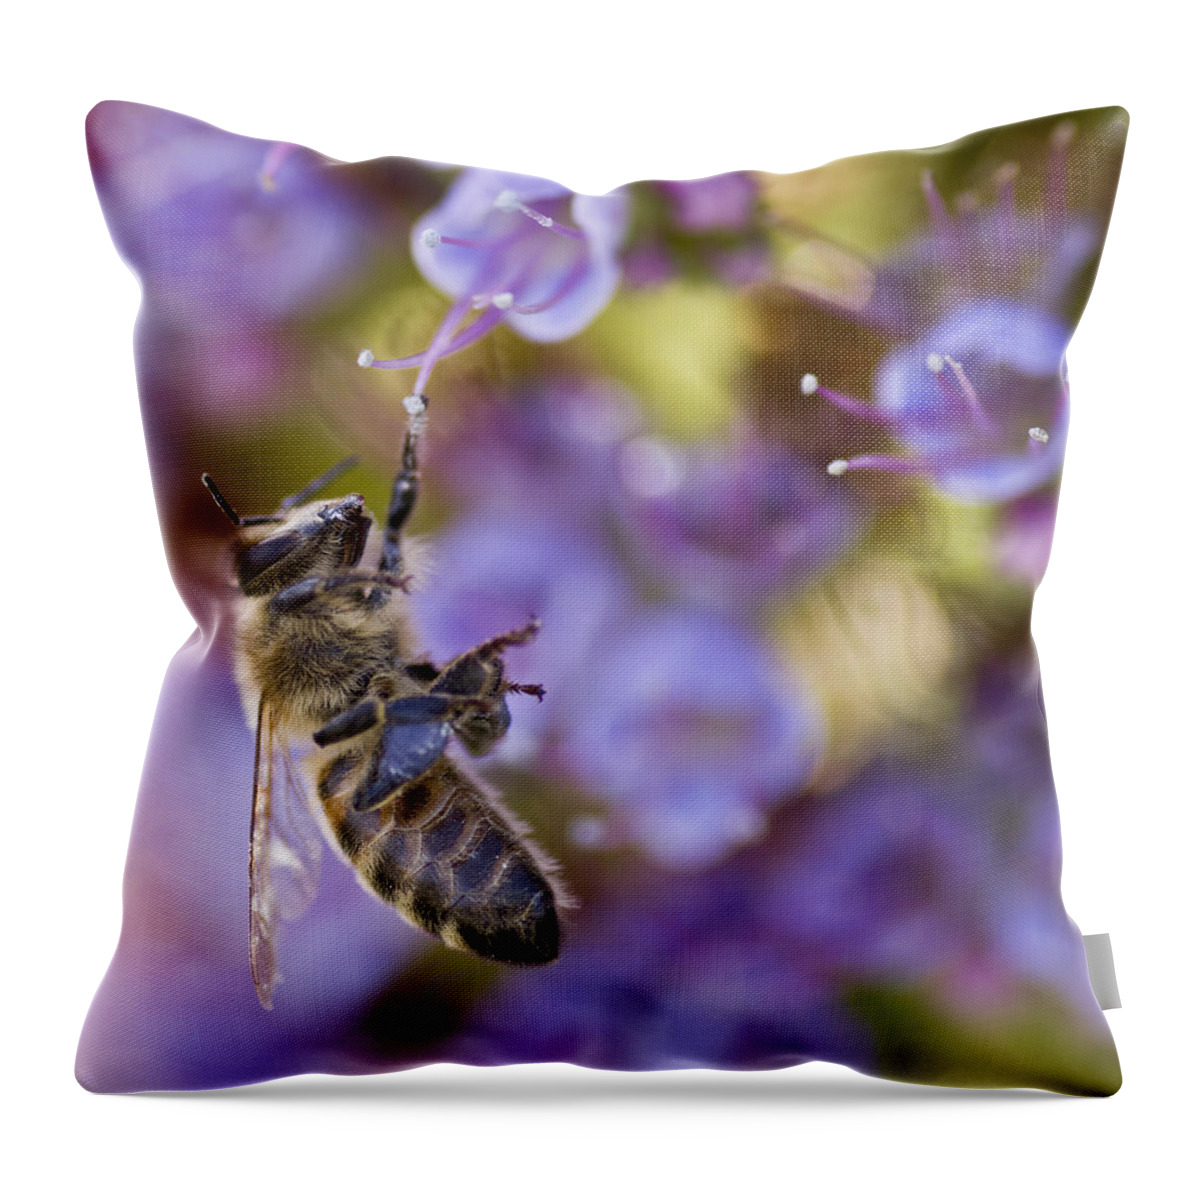 Bee Throw Pillow featuring the photograph Hang On by Priya Ghose